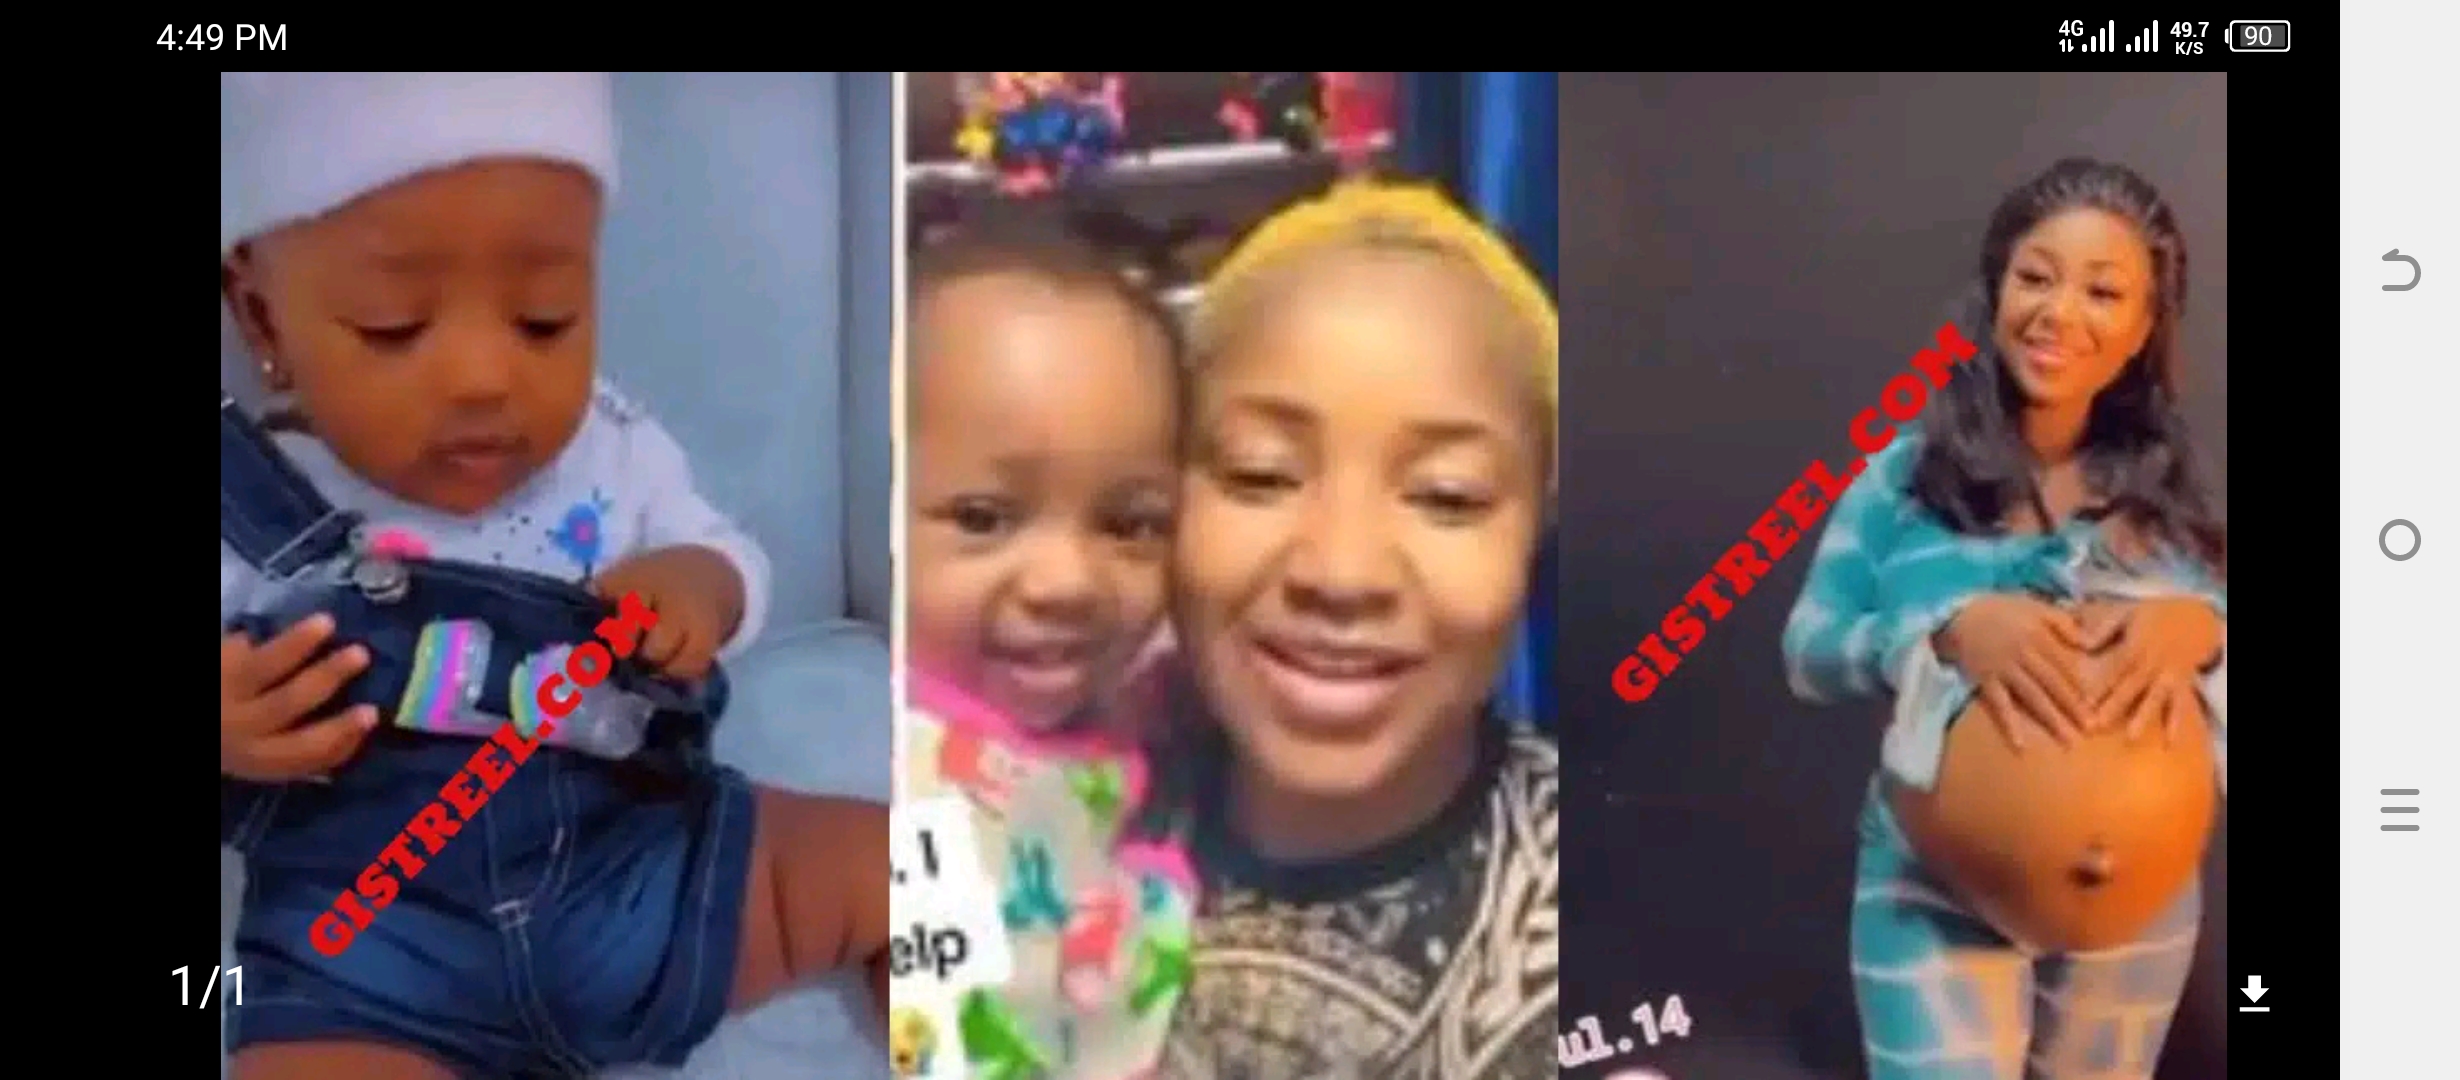 young Ghanaian lady has caused a stir online after coming out to claim that Afrobeat artist Davido abandoned her with his child. Davido has been in the headlines for weeks after several women came out to accuse him of being responsible for their pregnancies. A US model and entrepreneur, a French lady, and a Kenyan woman all came out to accuse him of getting them pregnant. In a new development, a Ghanaian lady has gone viral on social media for accusing Davido for abanding her after getting her pregnant. Social media users have reacted to the video and the child. While some say the baby looked like their Davido, others also dragged the lady for clout chasing. Funky_blake: “But the pikin wan use style resemble am oh”. @Donrita also commented, “Davido gene strong na from face we go take know if pikin na him own .this child no resemble davido go find him papa for front”. @Fashiontrends also said, “That child resembles David no DNA is even needed, but at this juncture let his family members look into it, all those women and there kids should all be taken care of”. @Missosifo: “This child looks like the other kids….hmnnn”.